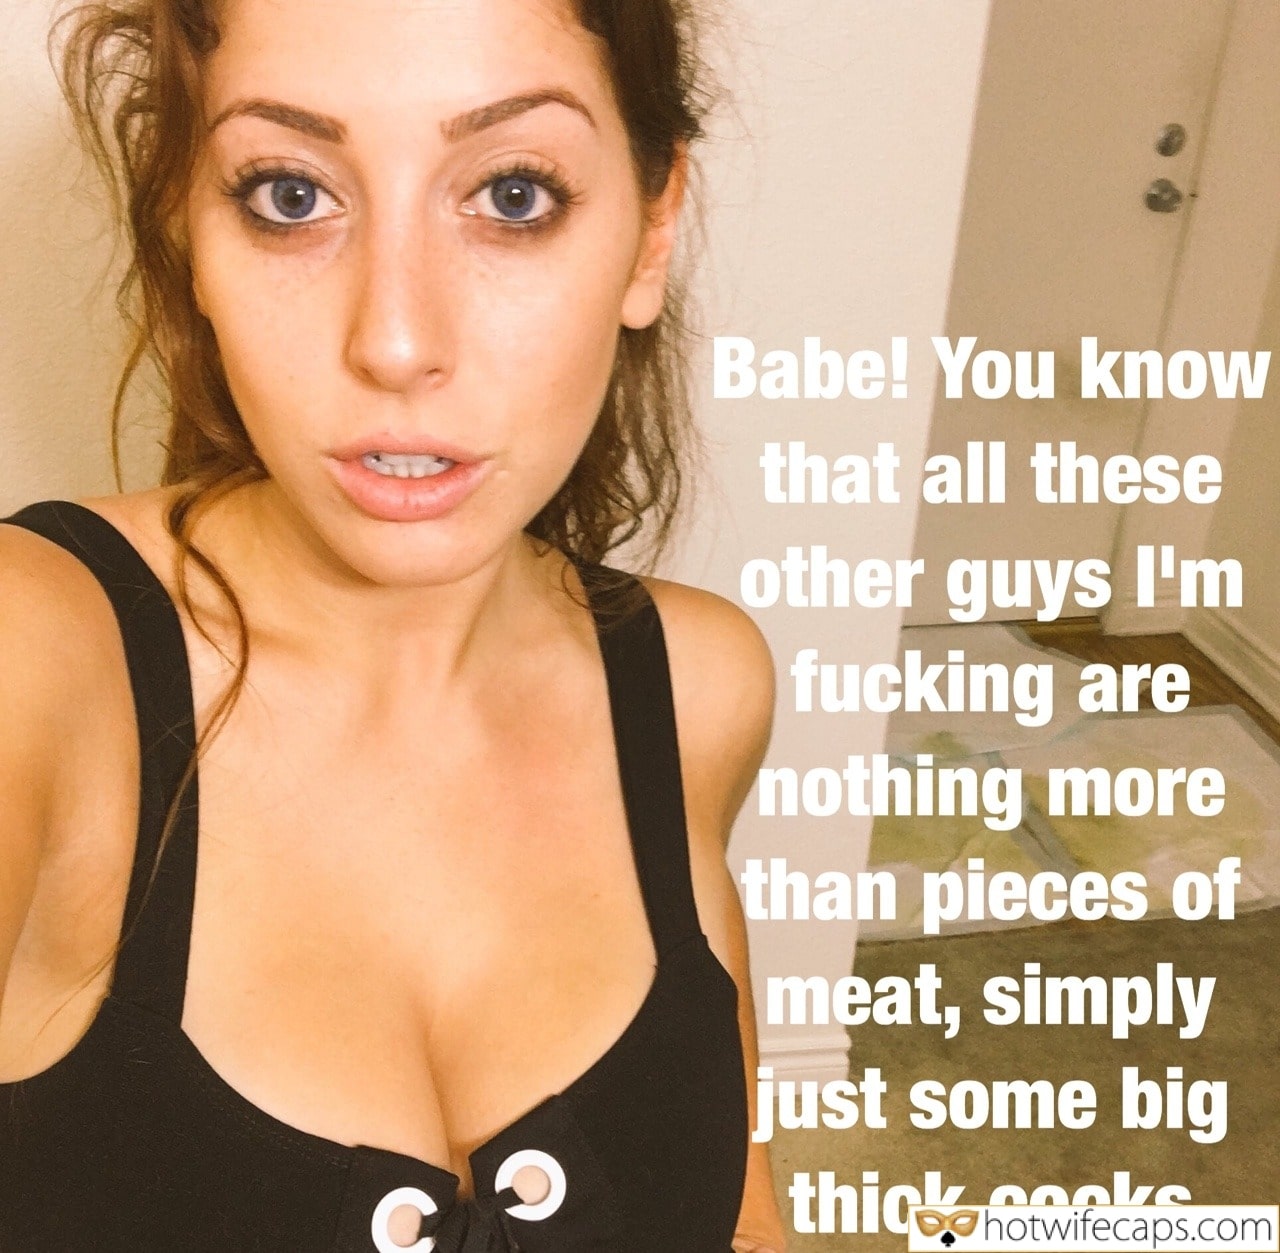 Sexy Memes It's too big Cuckold Cleanup Cheating Bigger Cock hotwife caption: Babe! You know that all these other guys I’m fucking are nothing more than pieces of meat, simply just some big thick cocks Blue Eyed Sexy Wife